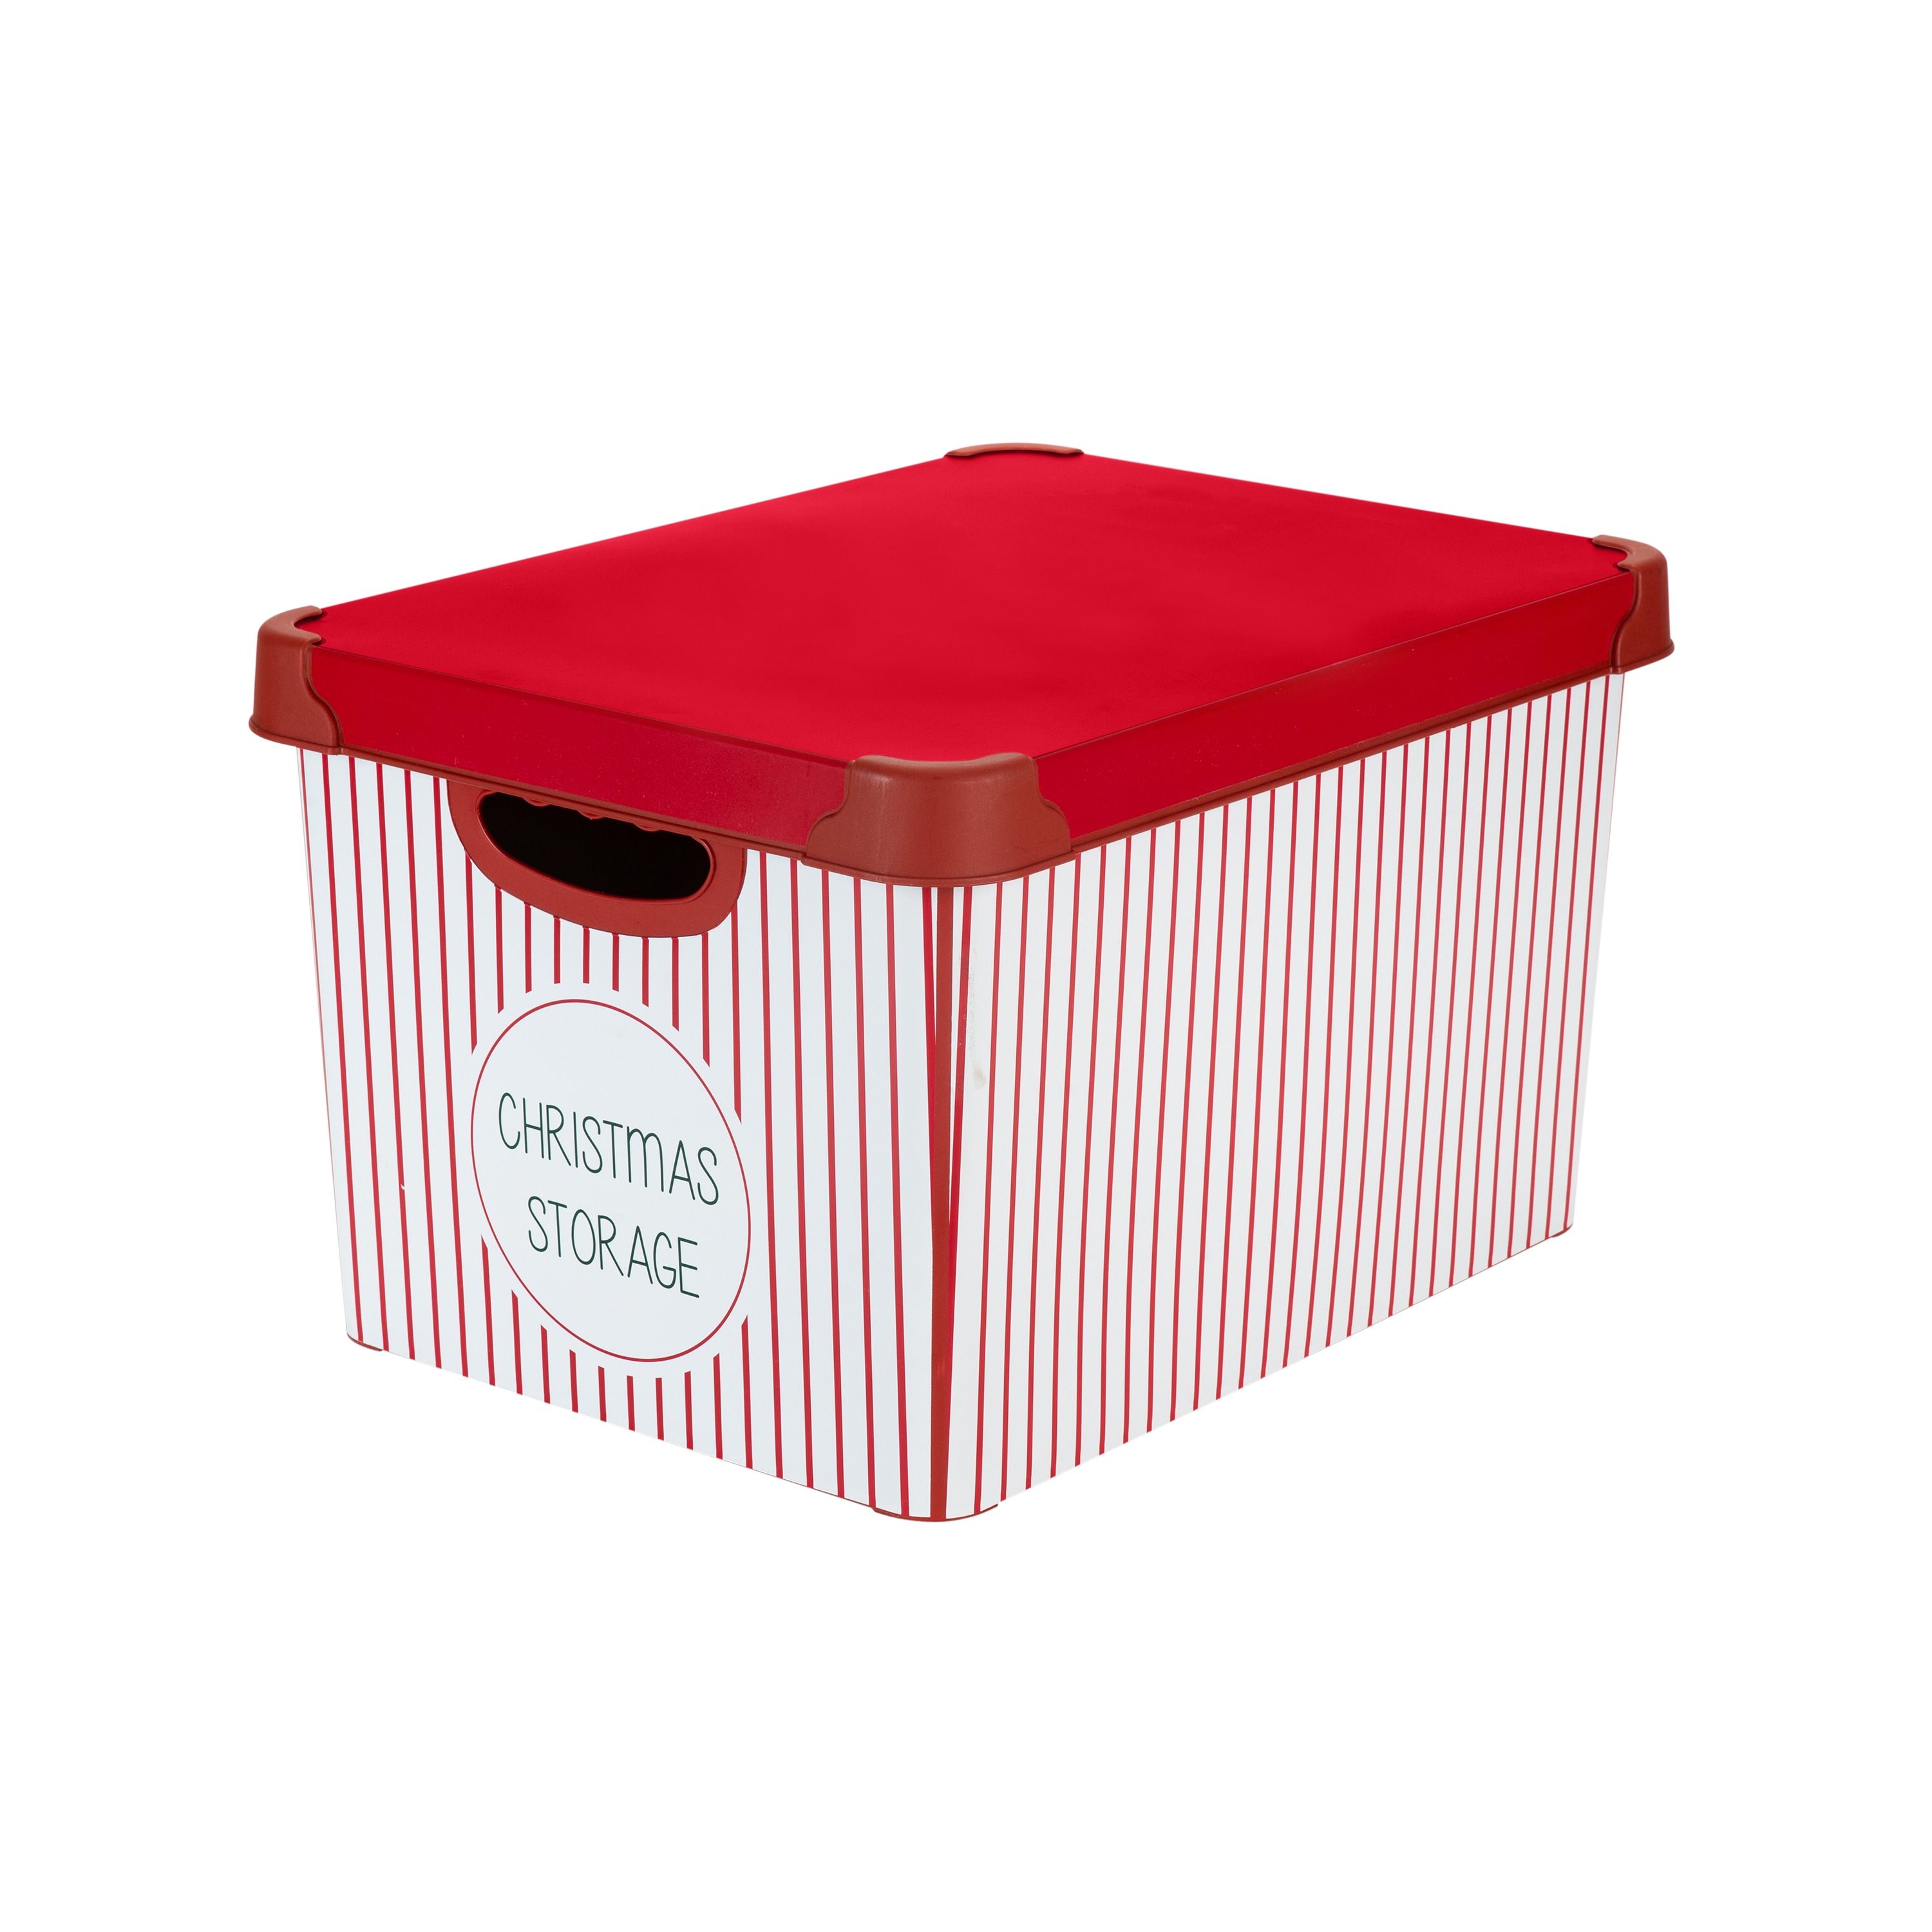 Simplify 11.81-in x 5.91-in 80-Compartment Red Cardboard Ornament Storage  Box in the Ornament Storage Boxes department at